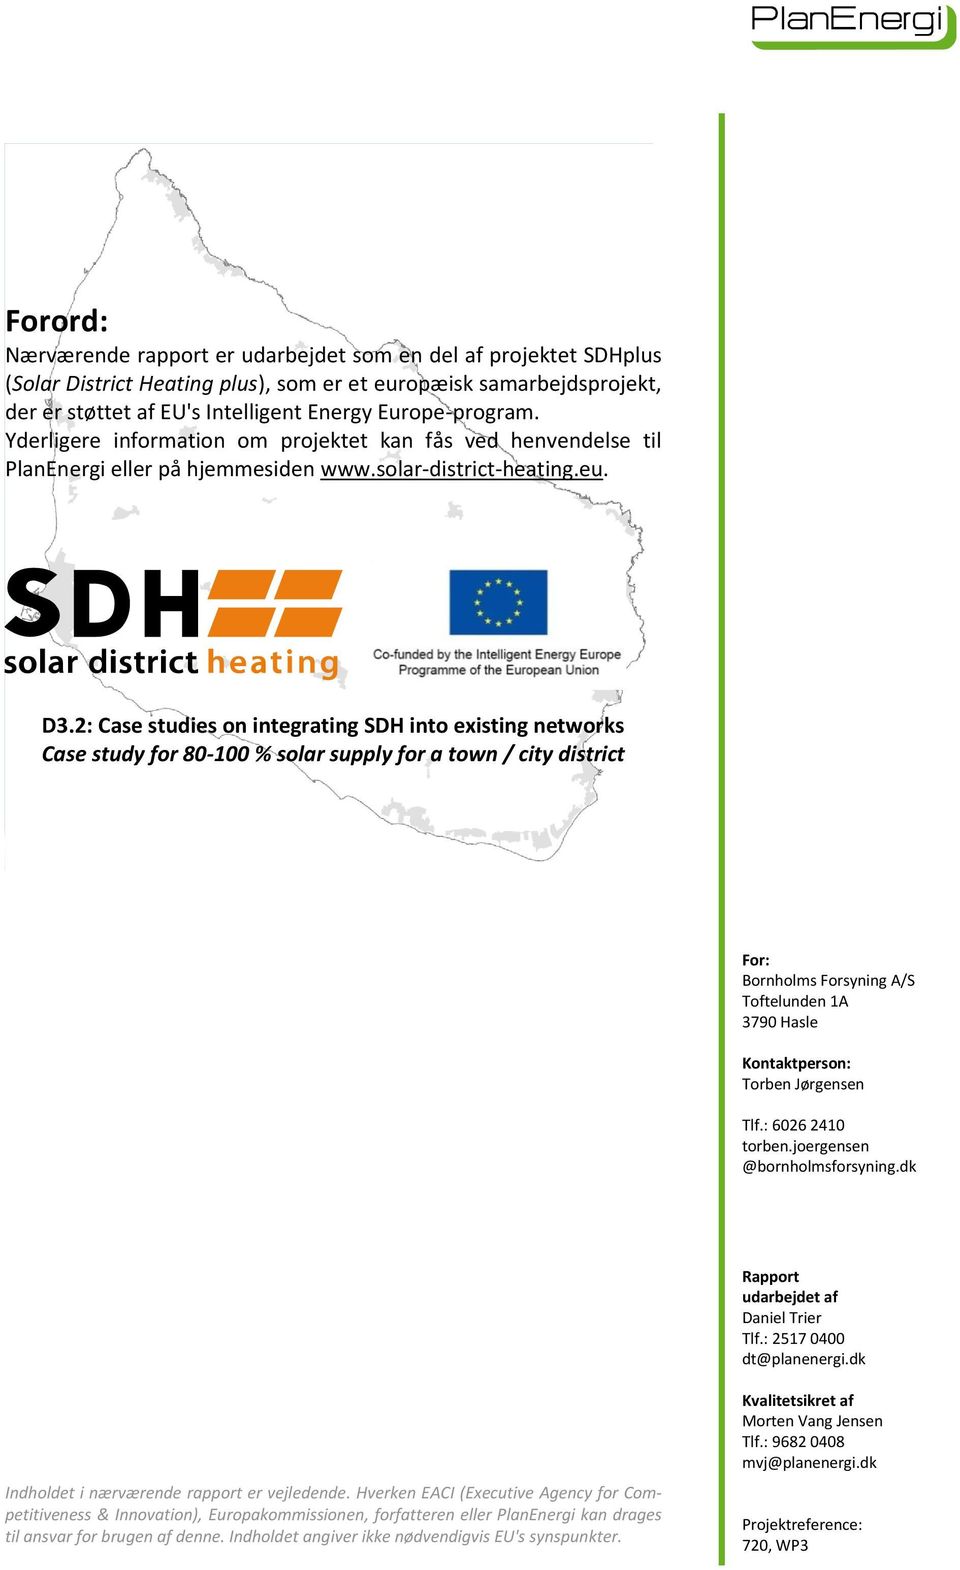 2: Case studies on integrating SDH into existing networks Case study for 80-100 % solar supply for a town / city district For: Bornholms Forsyning A/S Toftelunden 1A 3790 Hasle Kontaktperson: Torben